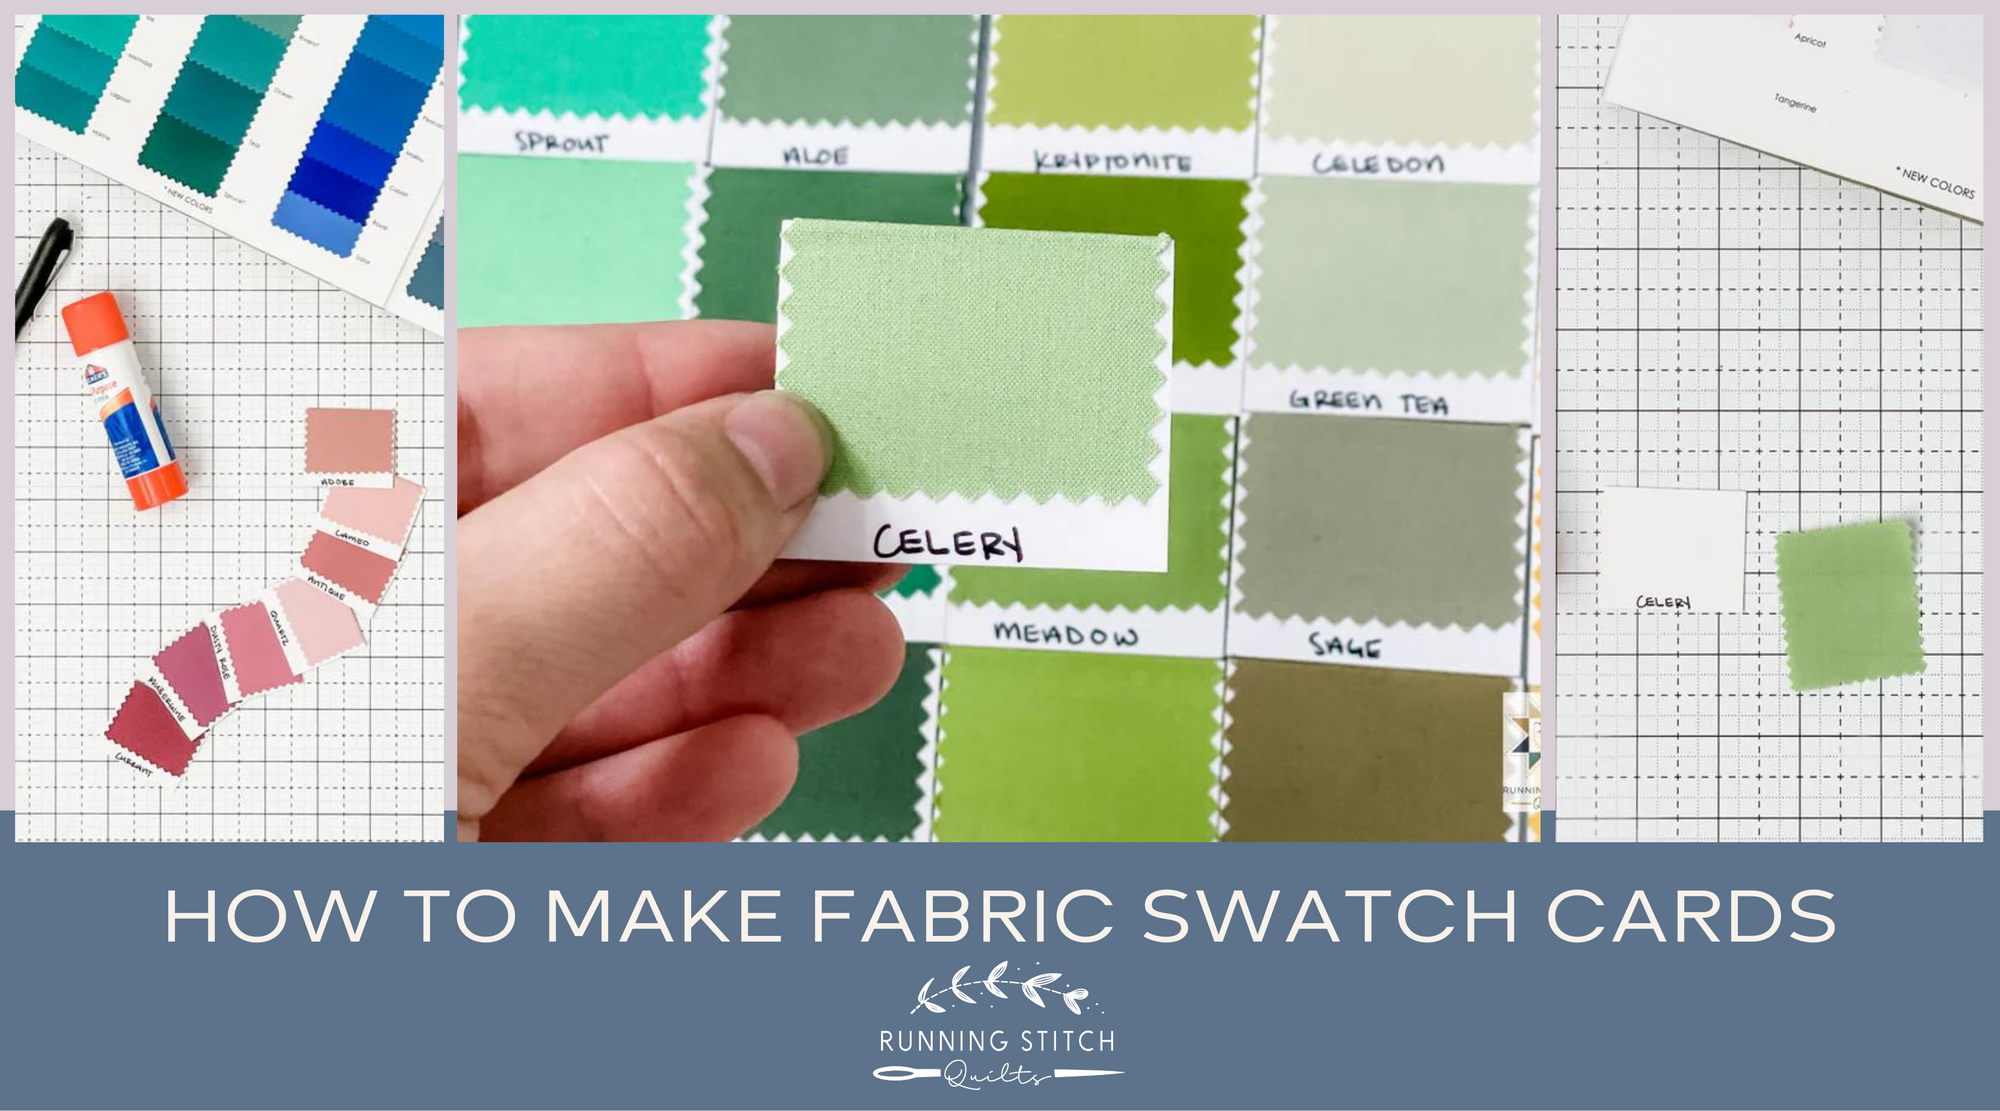 How to Make Fabric Swatch Cards